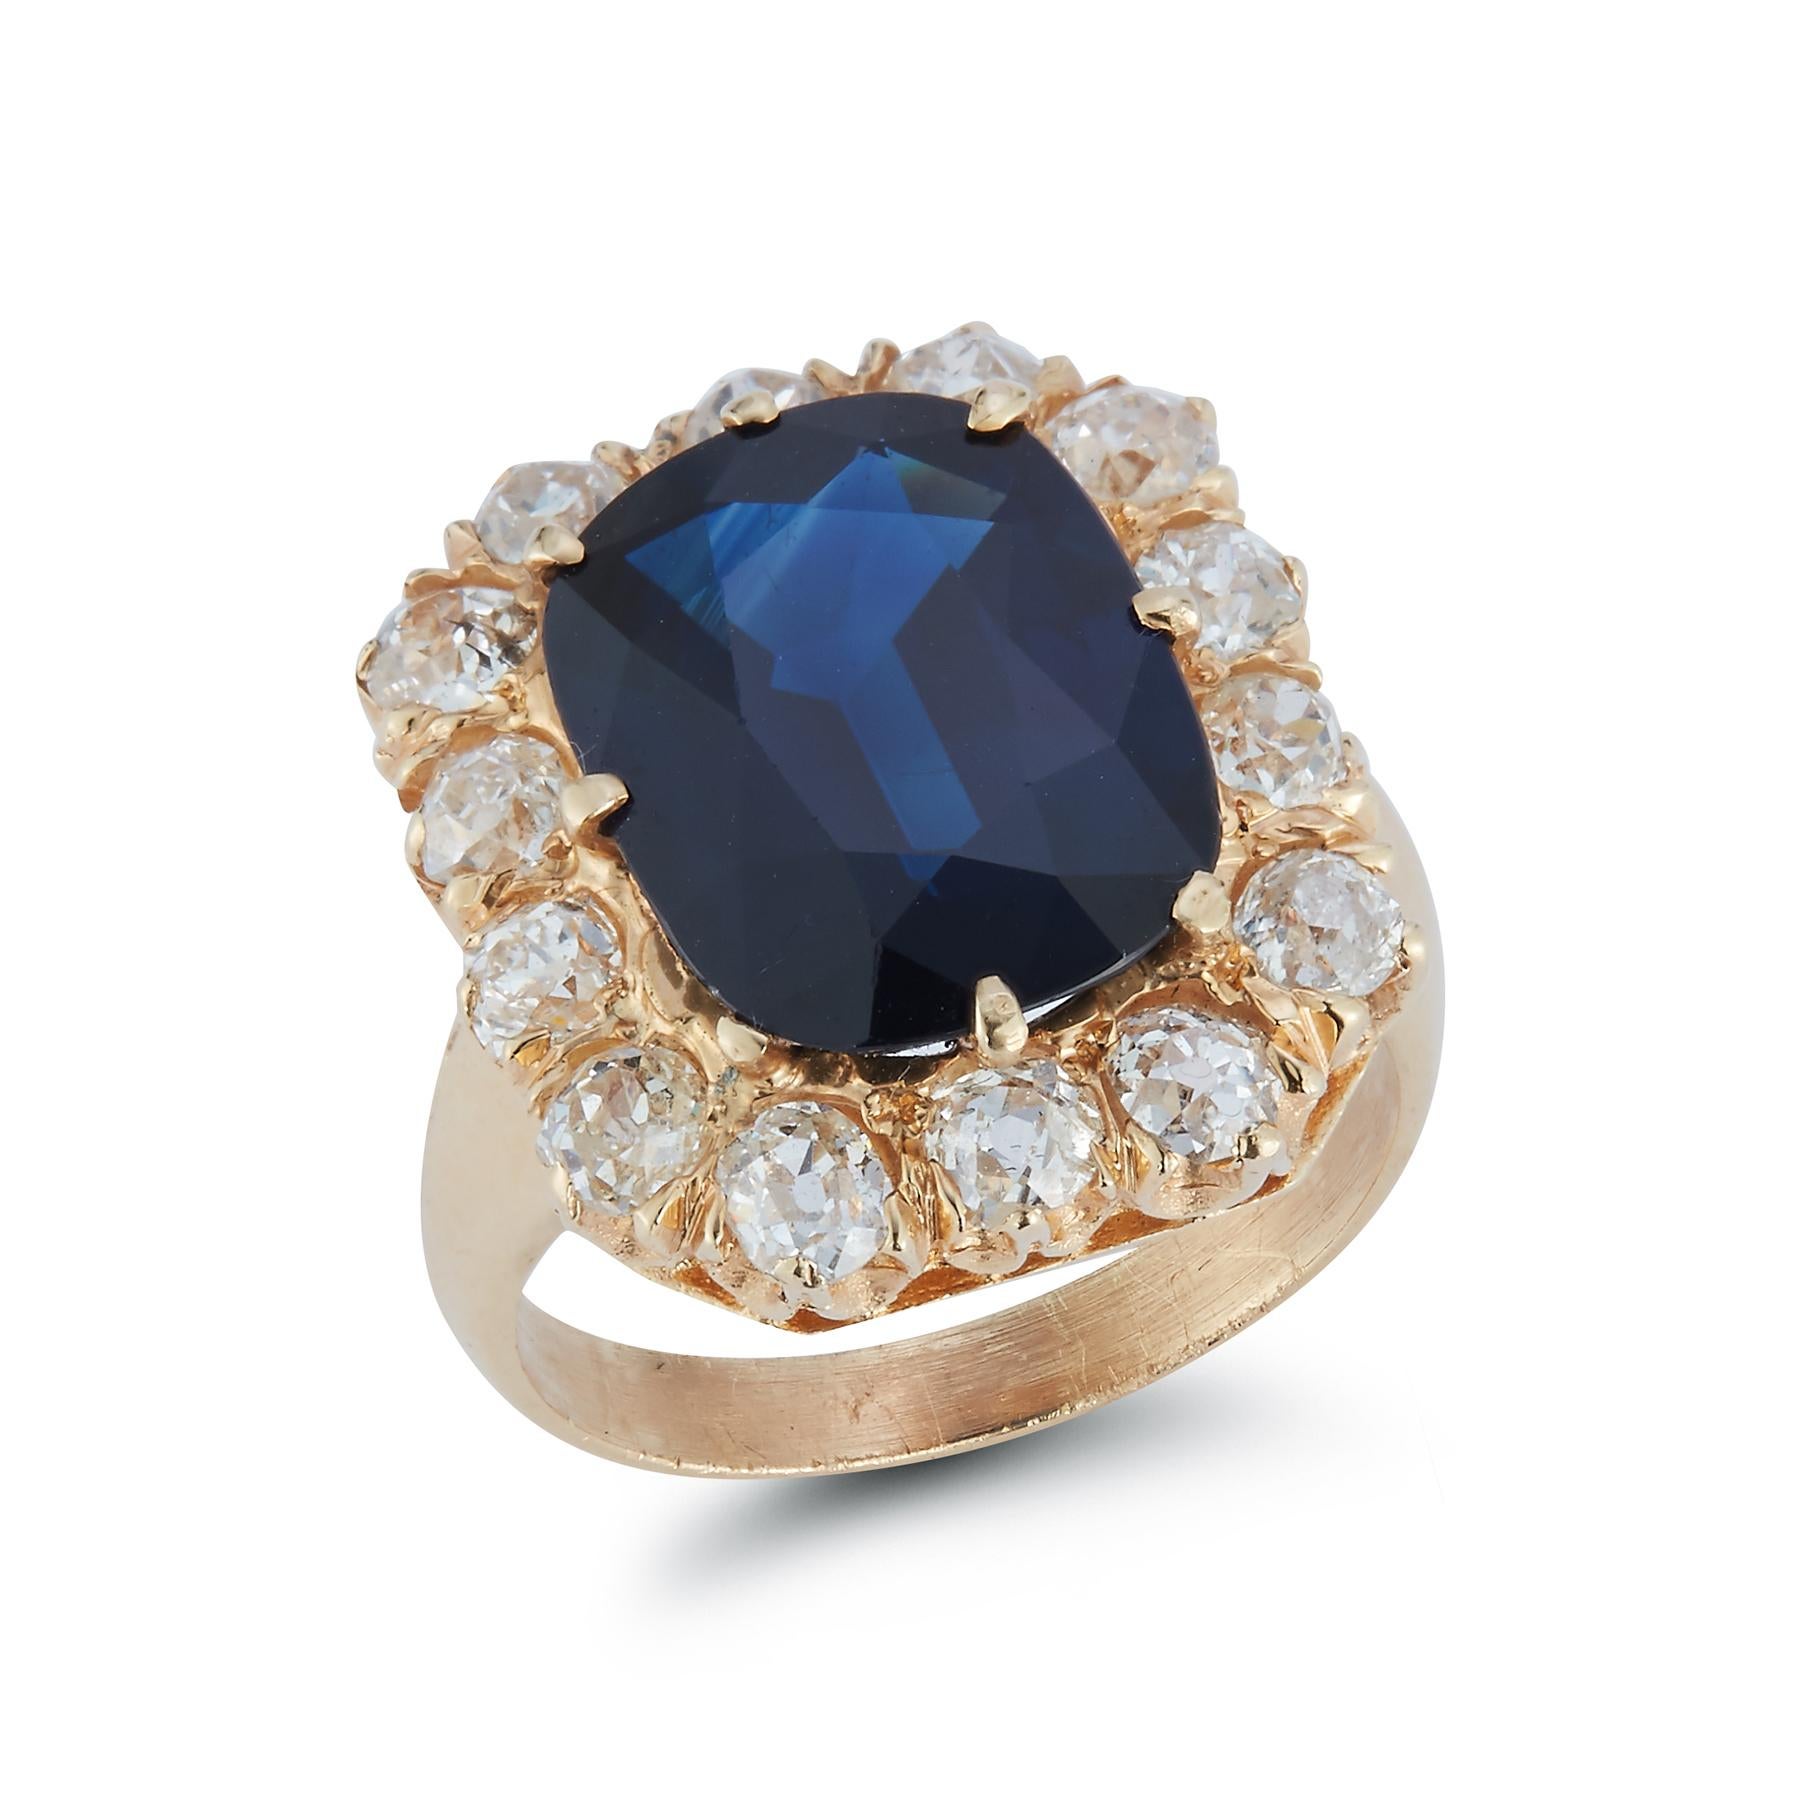 Oval Cut Sapphire & Diamond Halo Ring 

Oval Cut Sapphire 8.38 cts set in a 14k Gold ring 
Surrounded by 14 Brilliant Cut Diamonds

Ring Size 6.75
Resizable Free of Charge